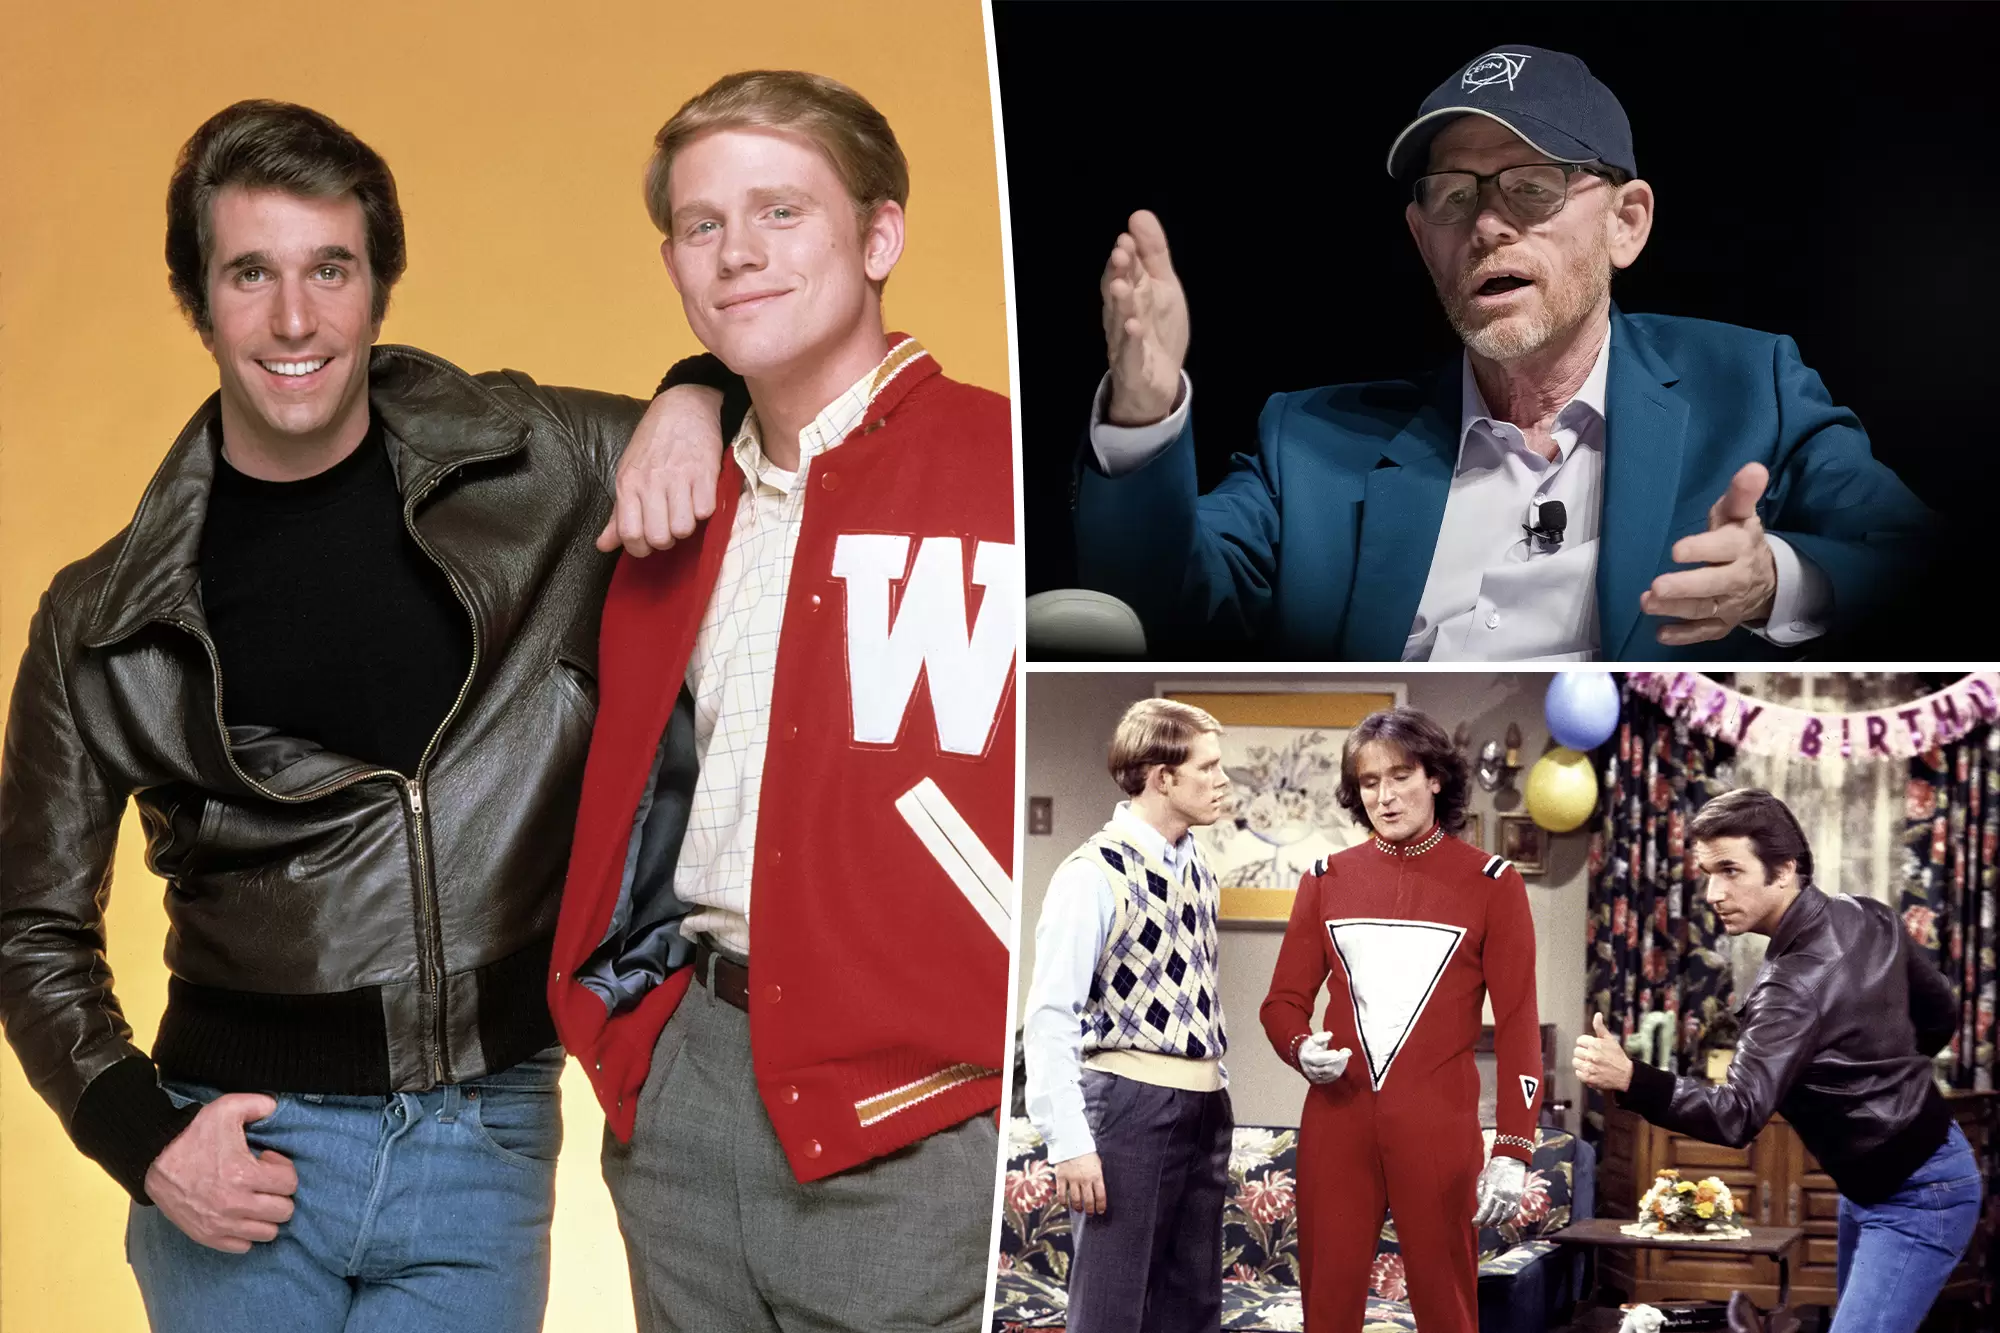 Ron Howard told ‘Happy Days’ producers he’d leave the show if they changed name to ‘Fonzie’s Happy Days’